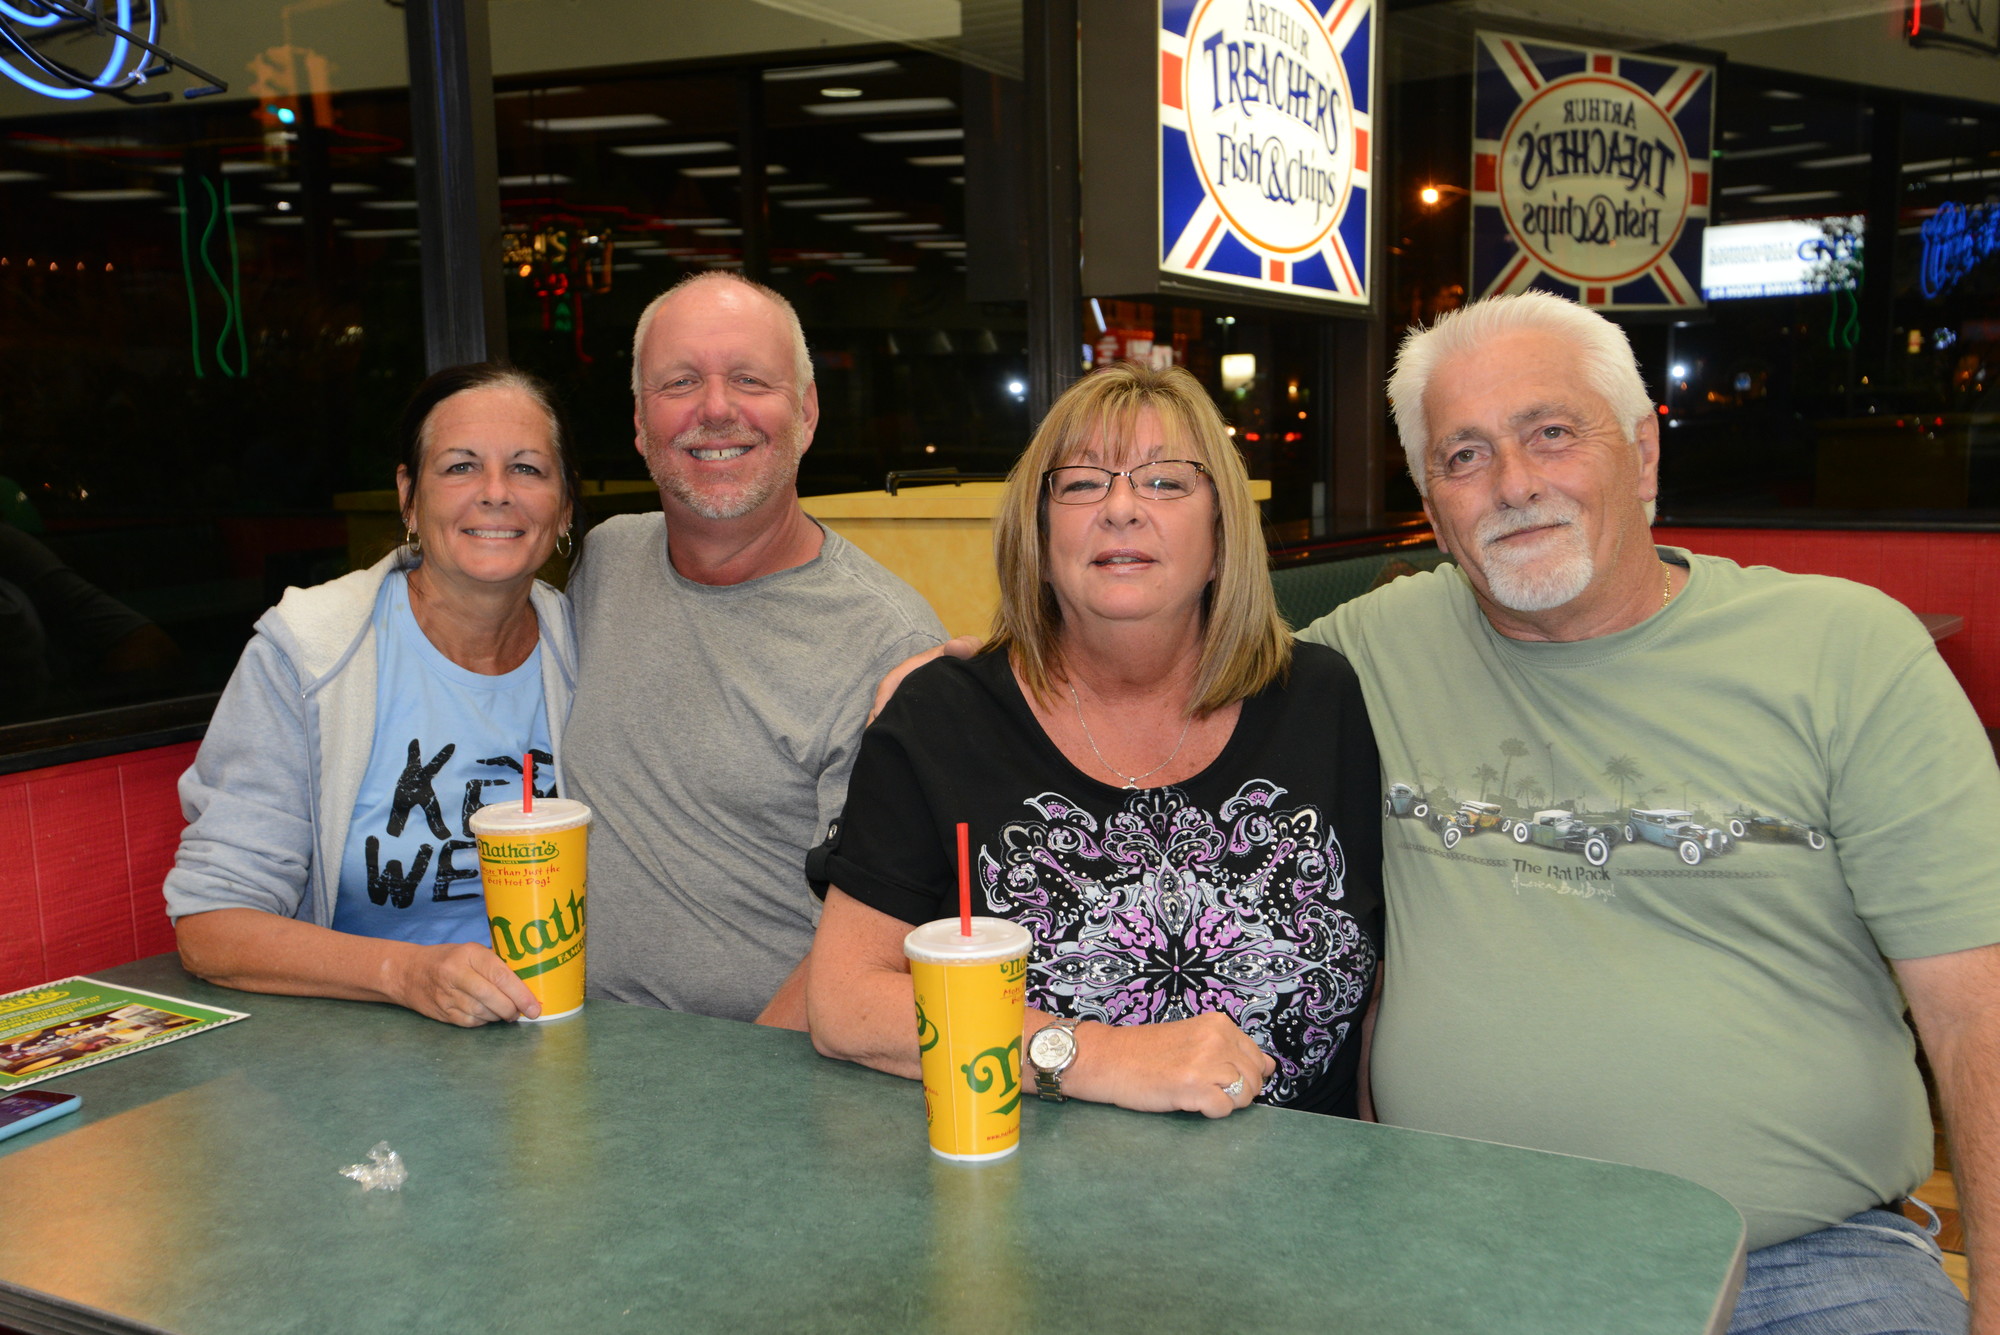 Double dating at Nathan’s, just as they have since 1978, Diane and Glen China, left, and Andrea and Greg Johnson said goodbye to one of their favorite hangouts.